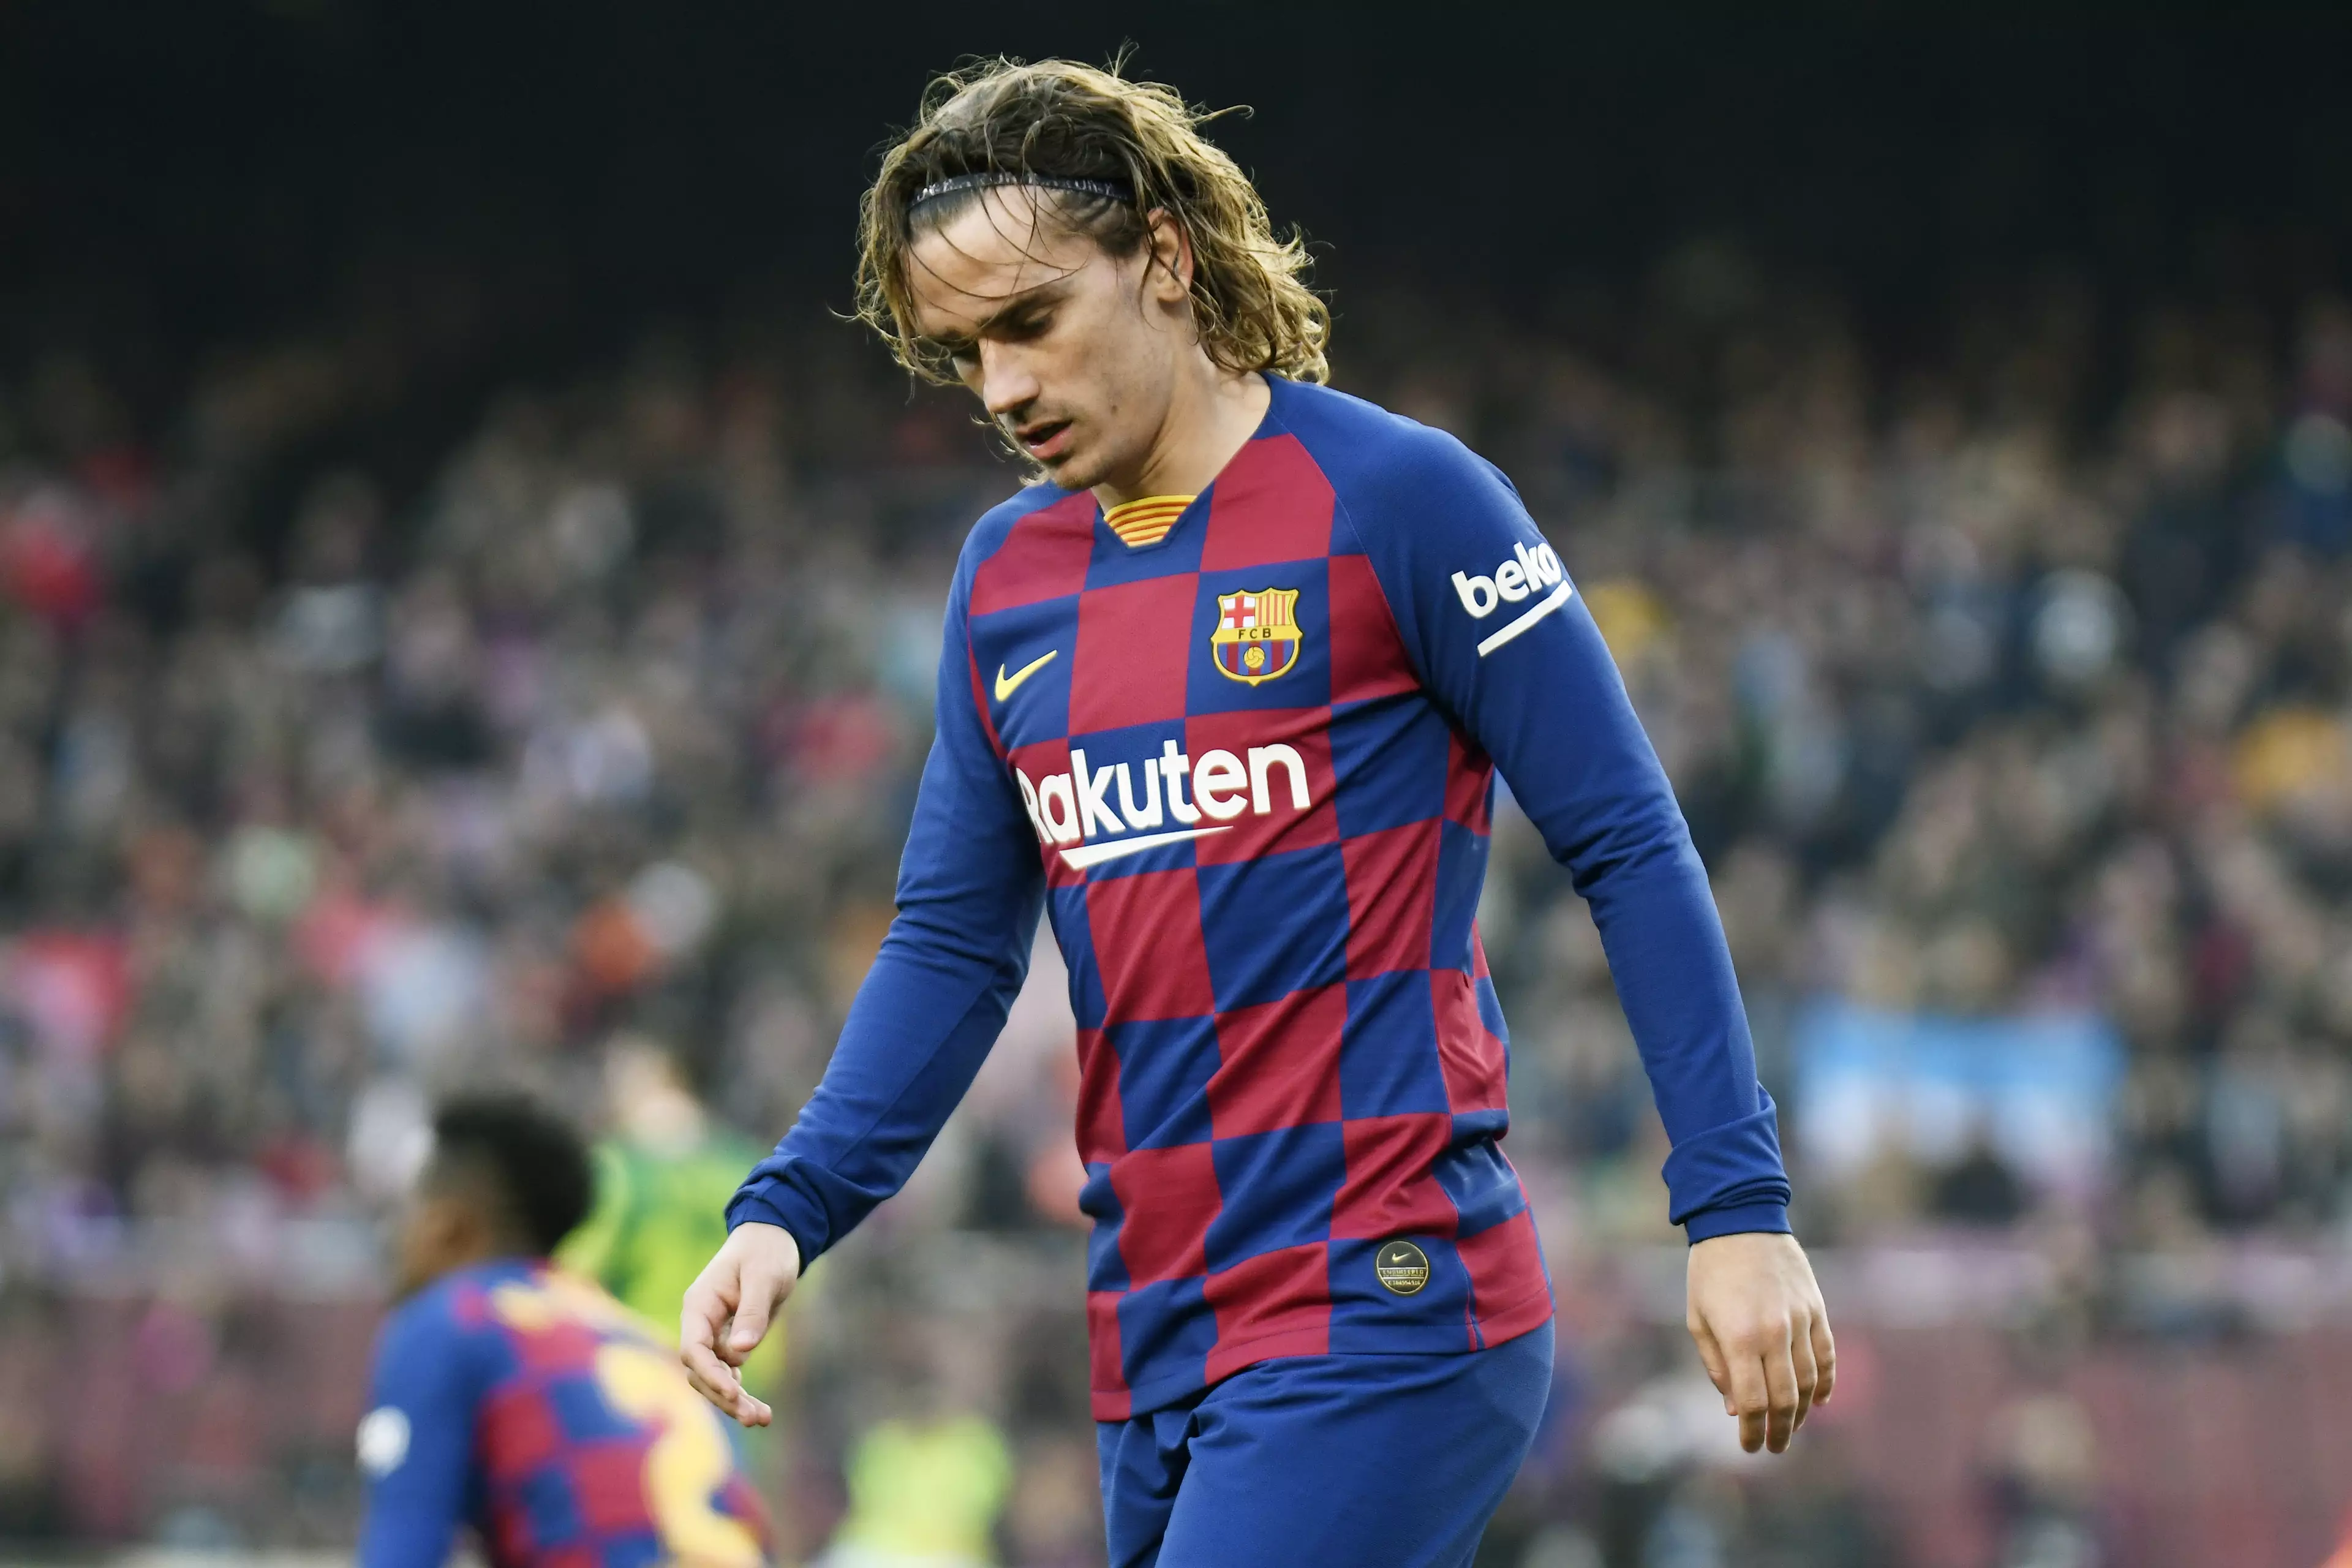 Griezmann has often cut a frustrated figure at Barcelona. Image: PA Images